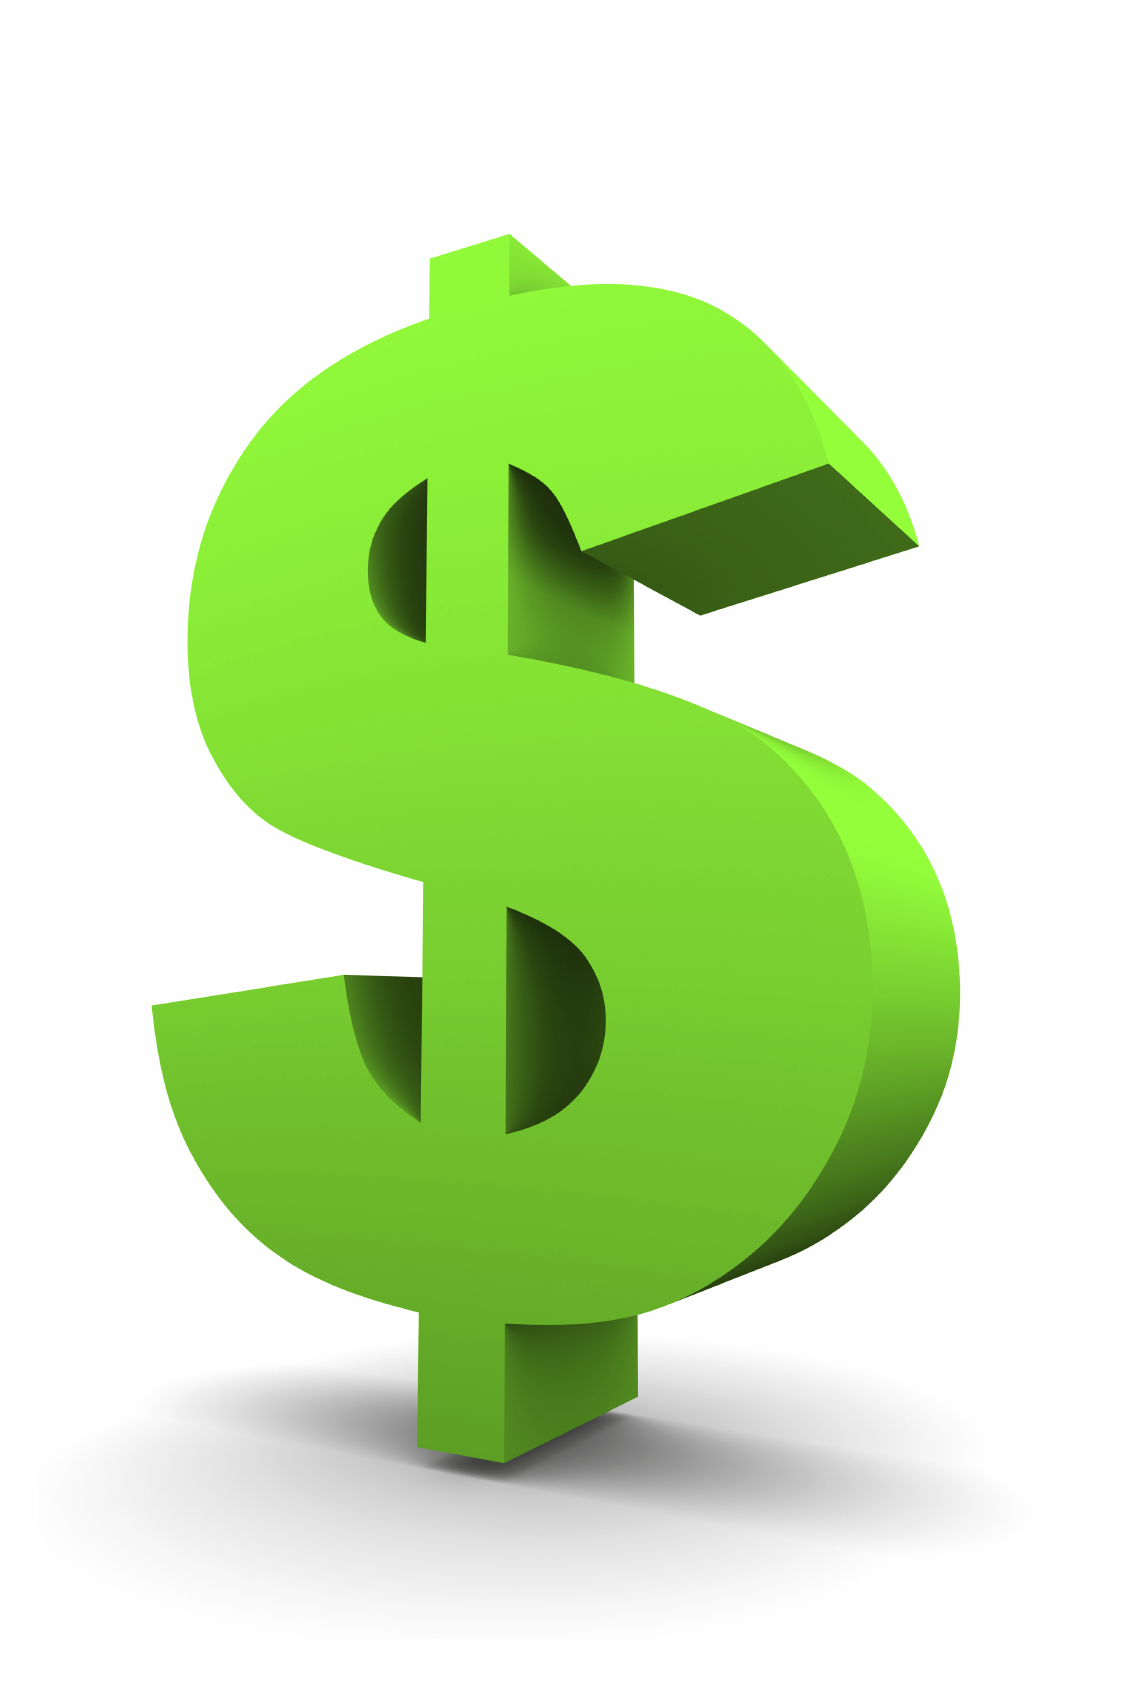 Wallpapers For > Dollar Sign Transparent Background